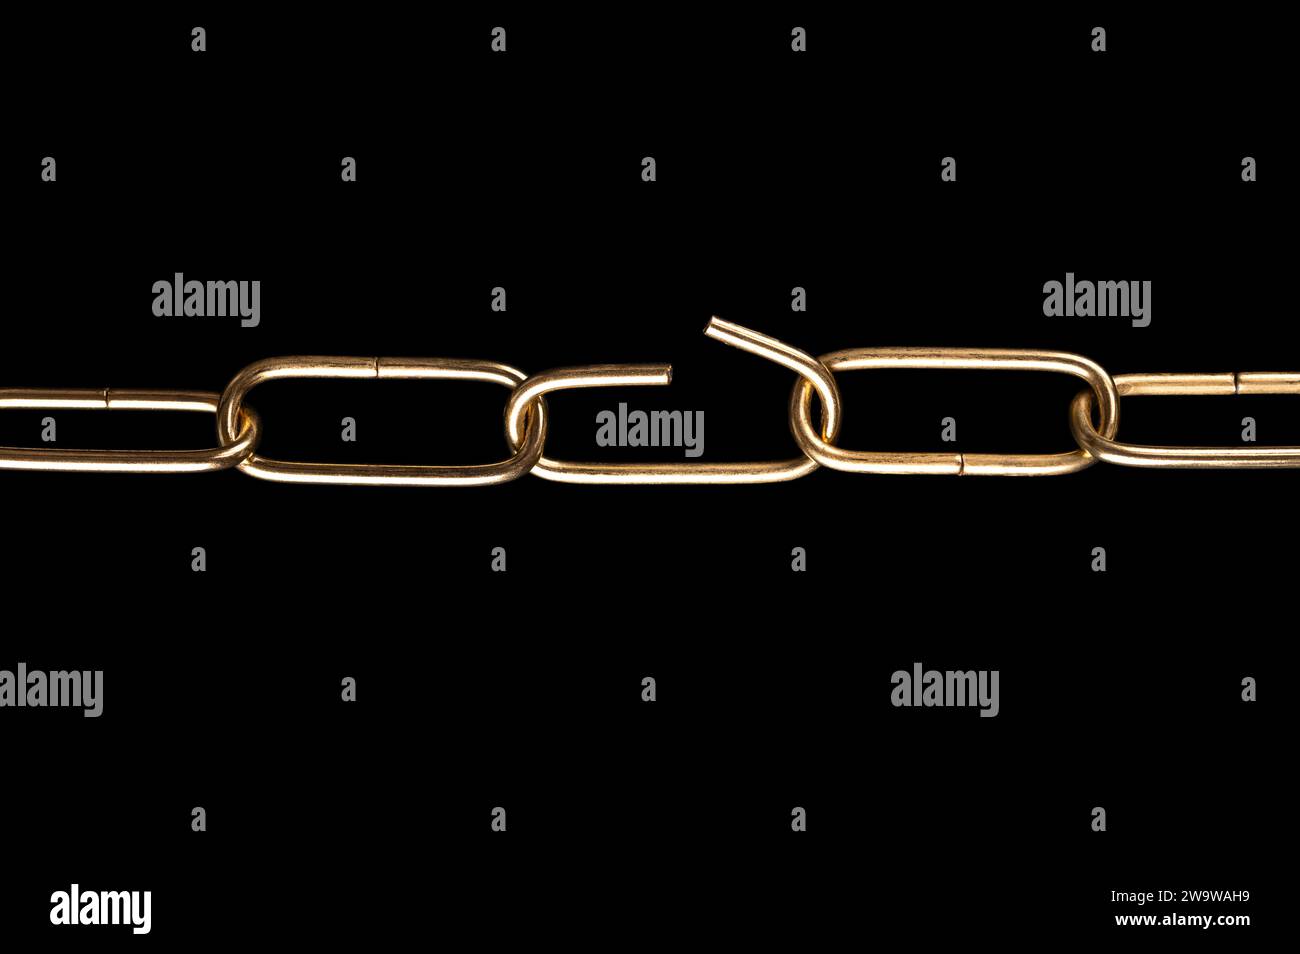 Steel chain with shiny brass plated surface, and with one link bent open, over black. Straight shaped smooth, decorative ring chain. Stock Photo